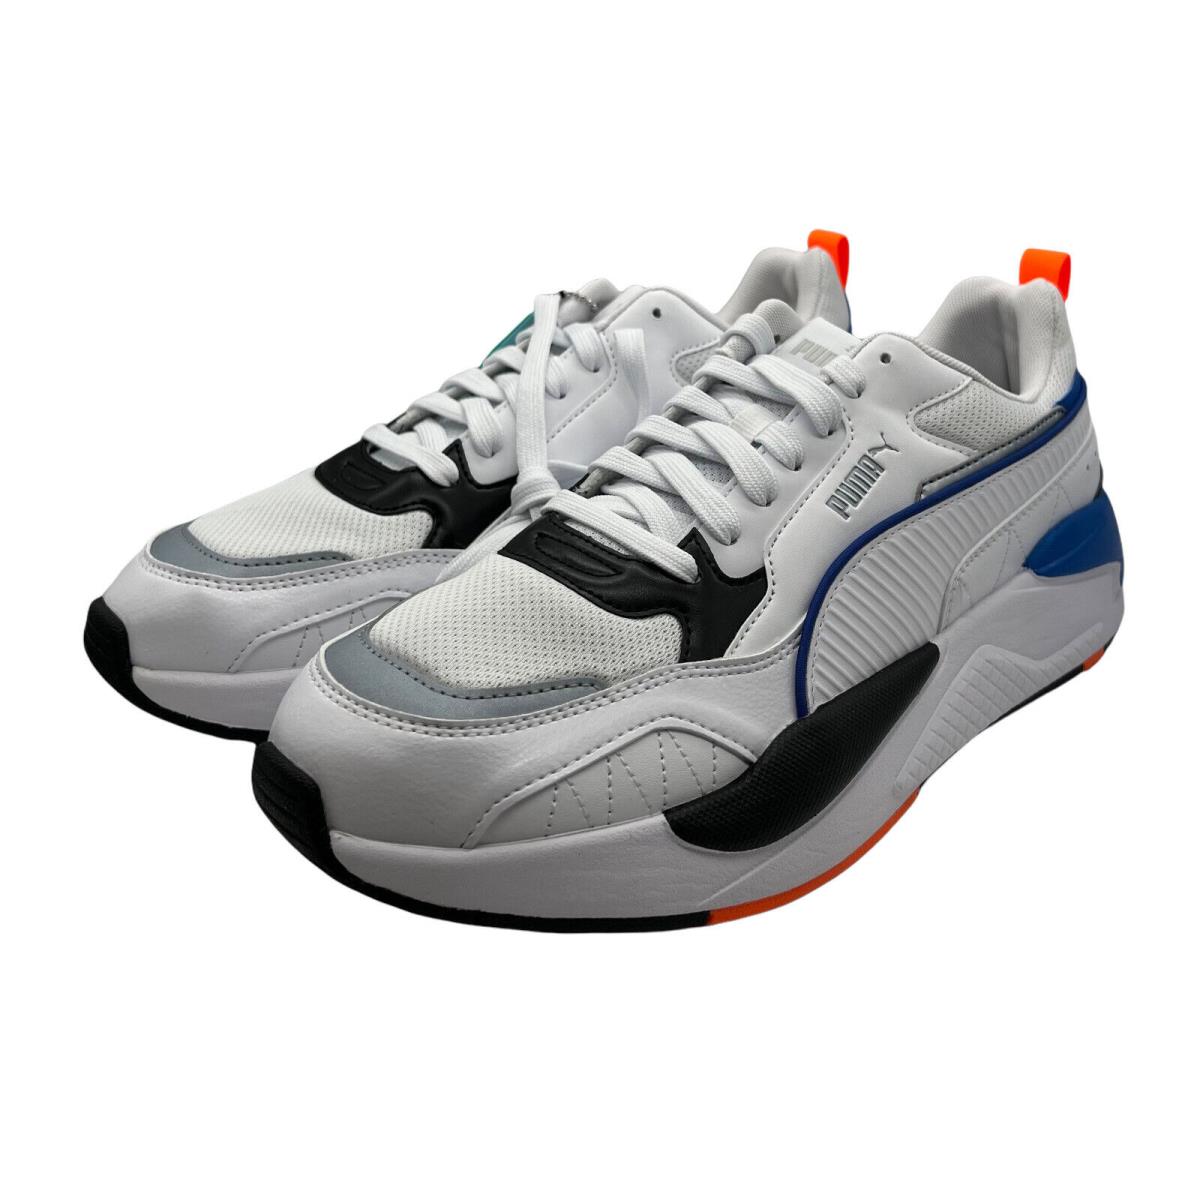 Puma Mens White 373108 02 X Ray 2 Square Low Top Athletic Sneaker Shoes Size 11